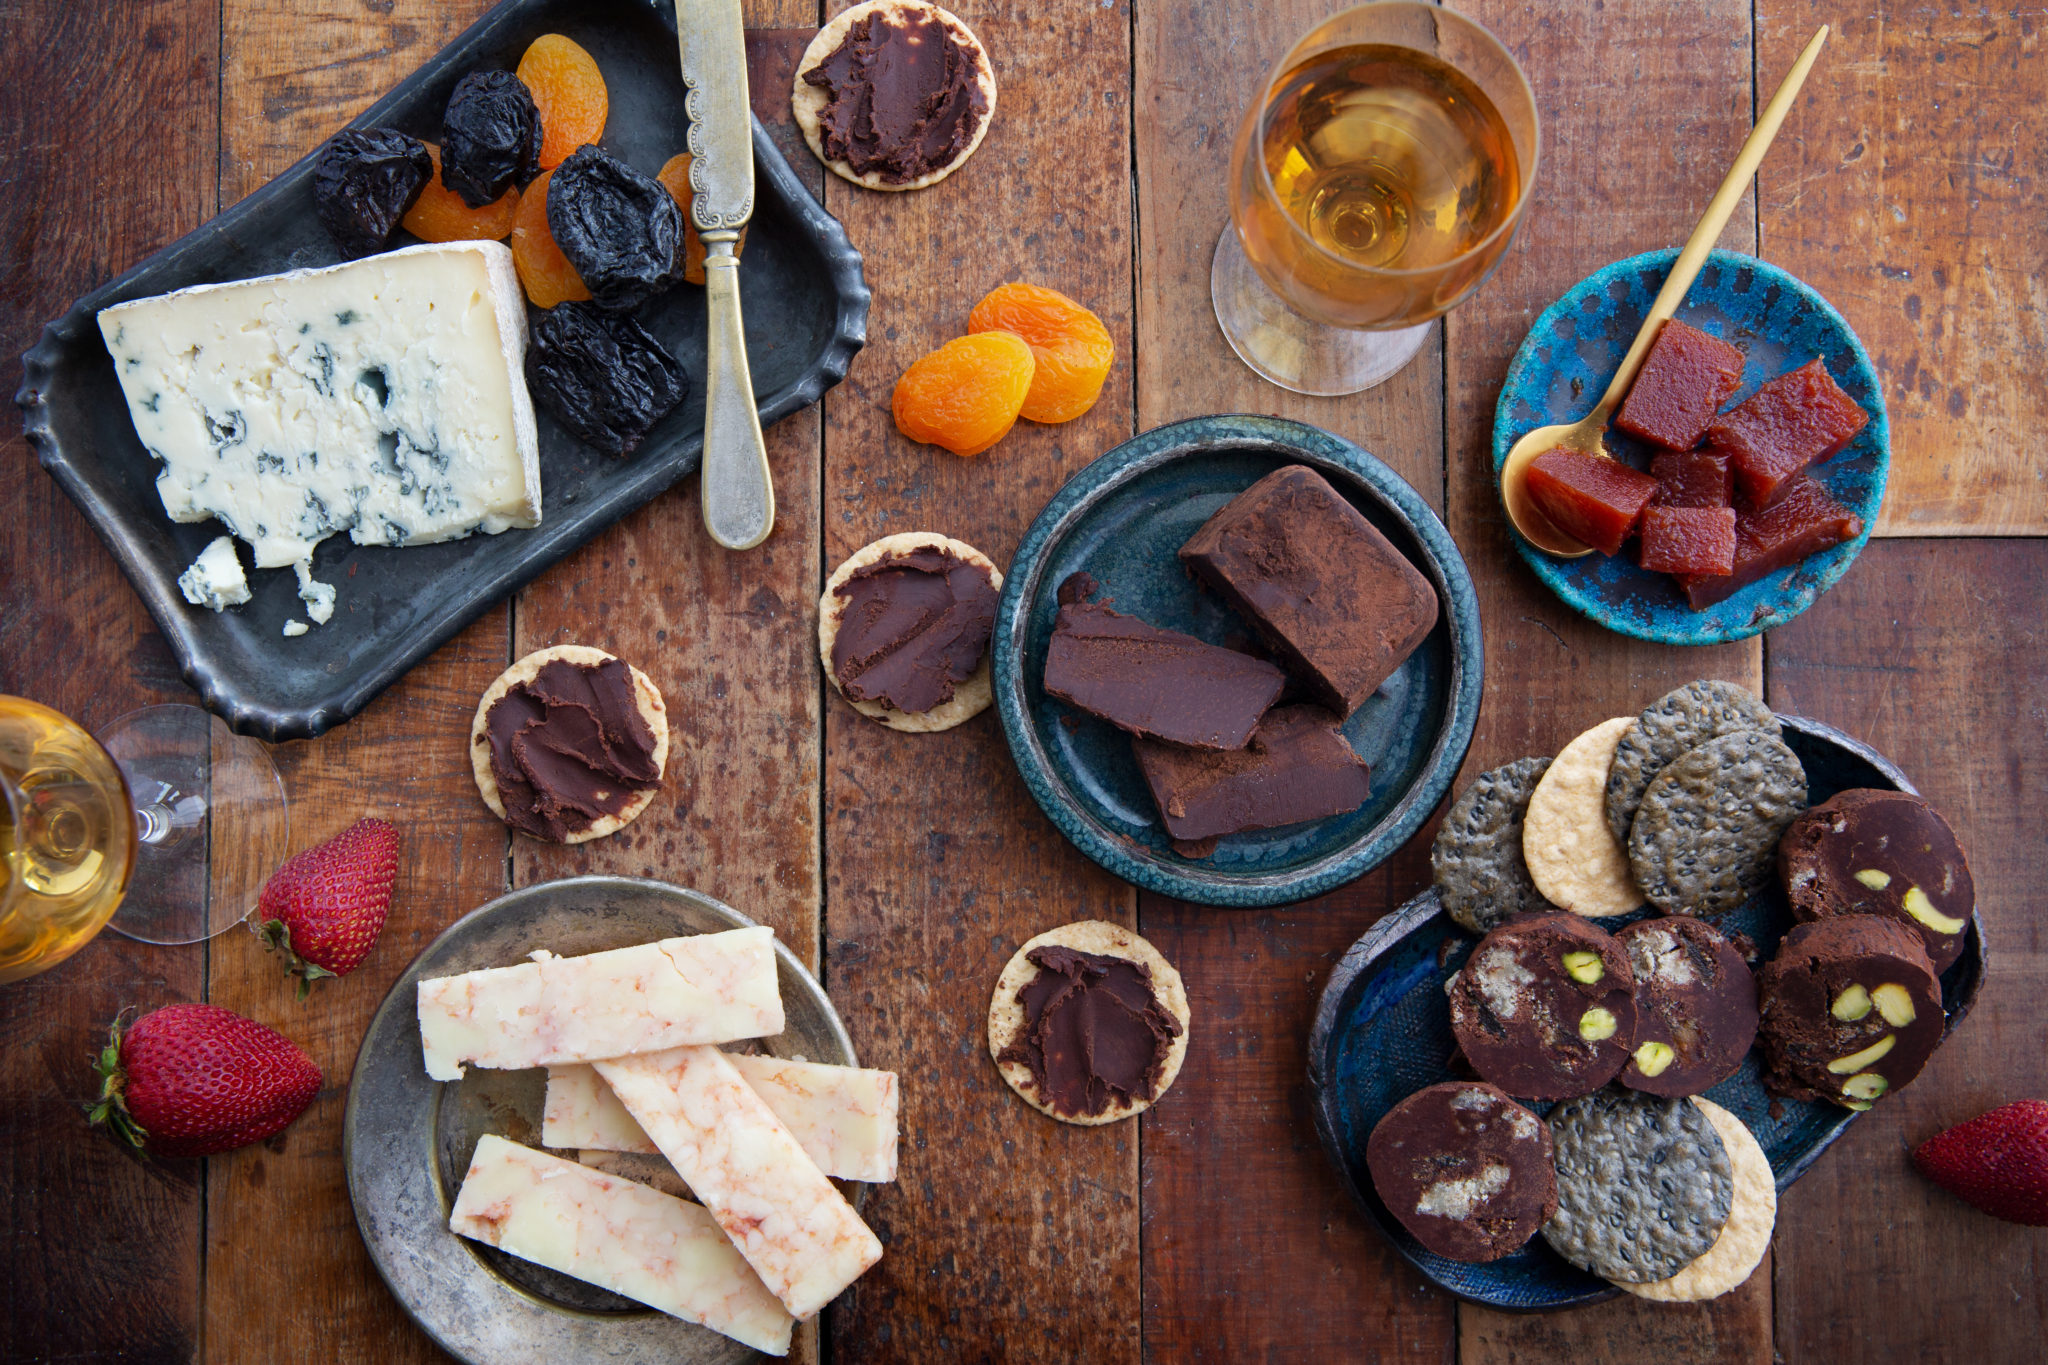 Cheese and chocolate charcuterie laid out on a wooden table